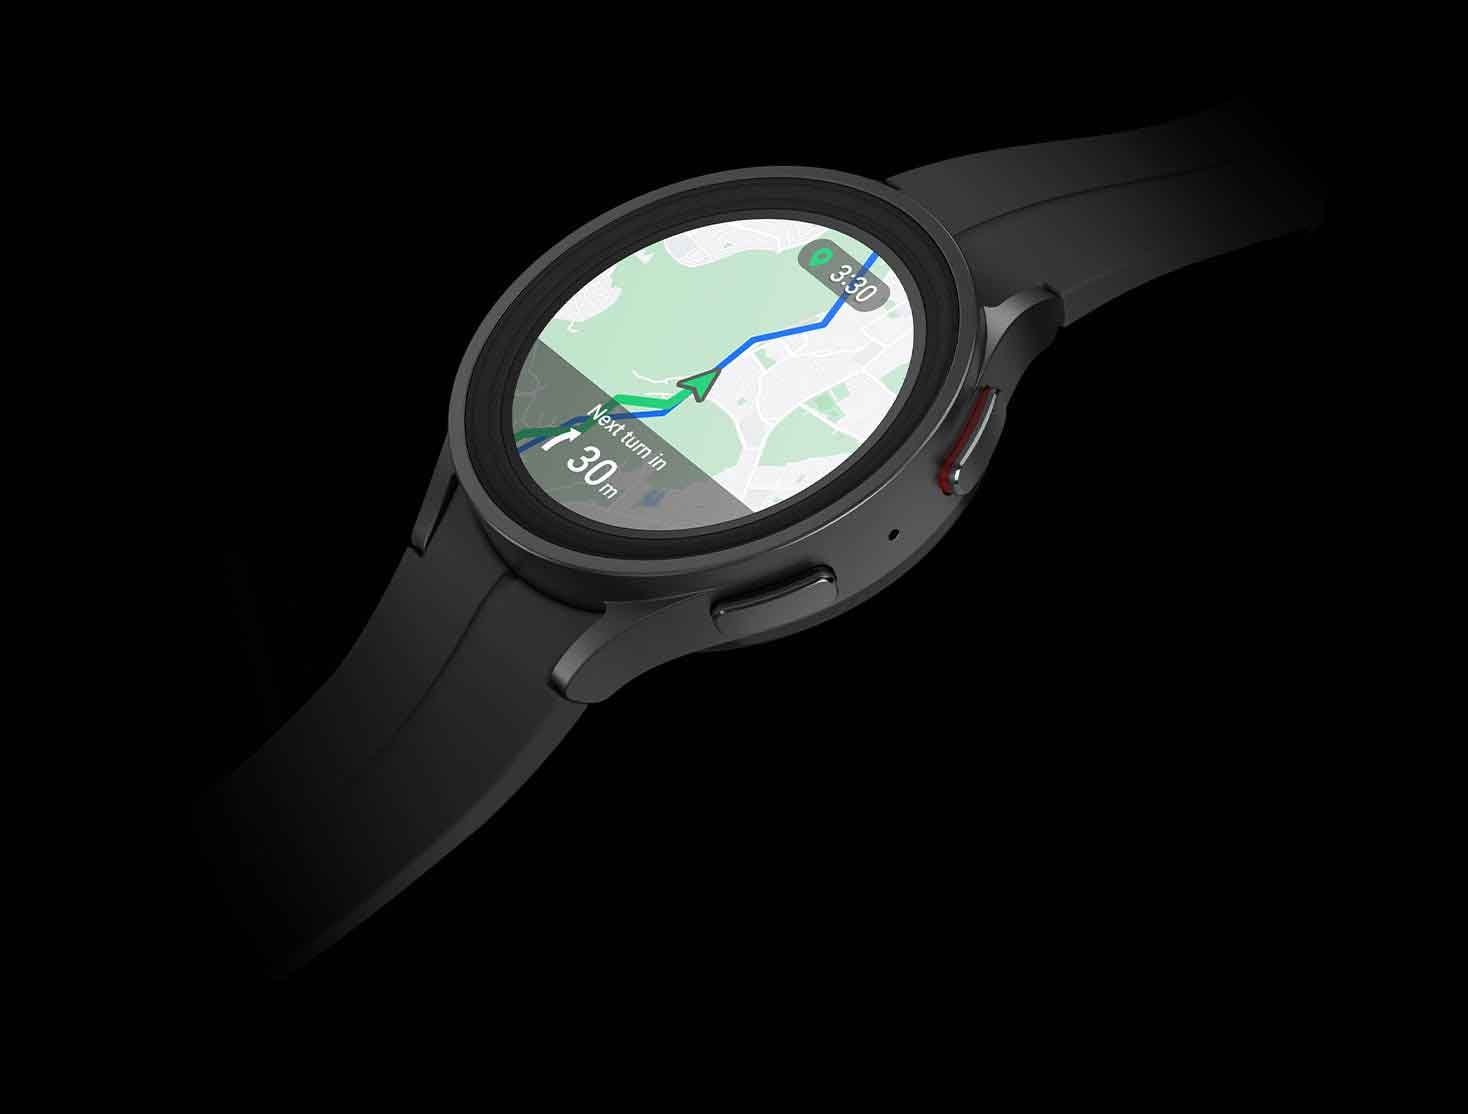 A Titanium Galaxy Watch5 Pro in black showing a map on the watch face featuring turn-by-turn navigation function.